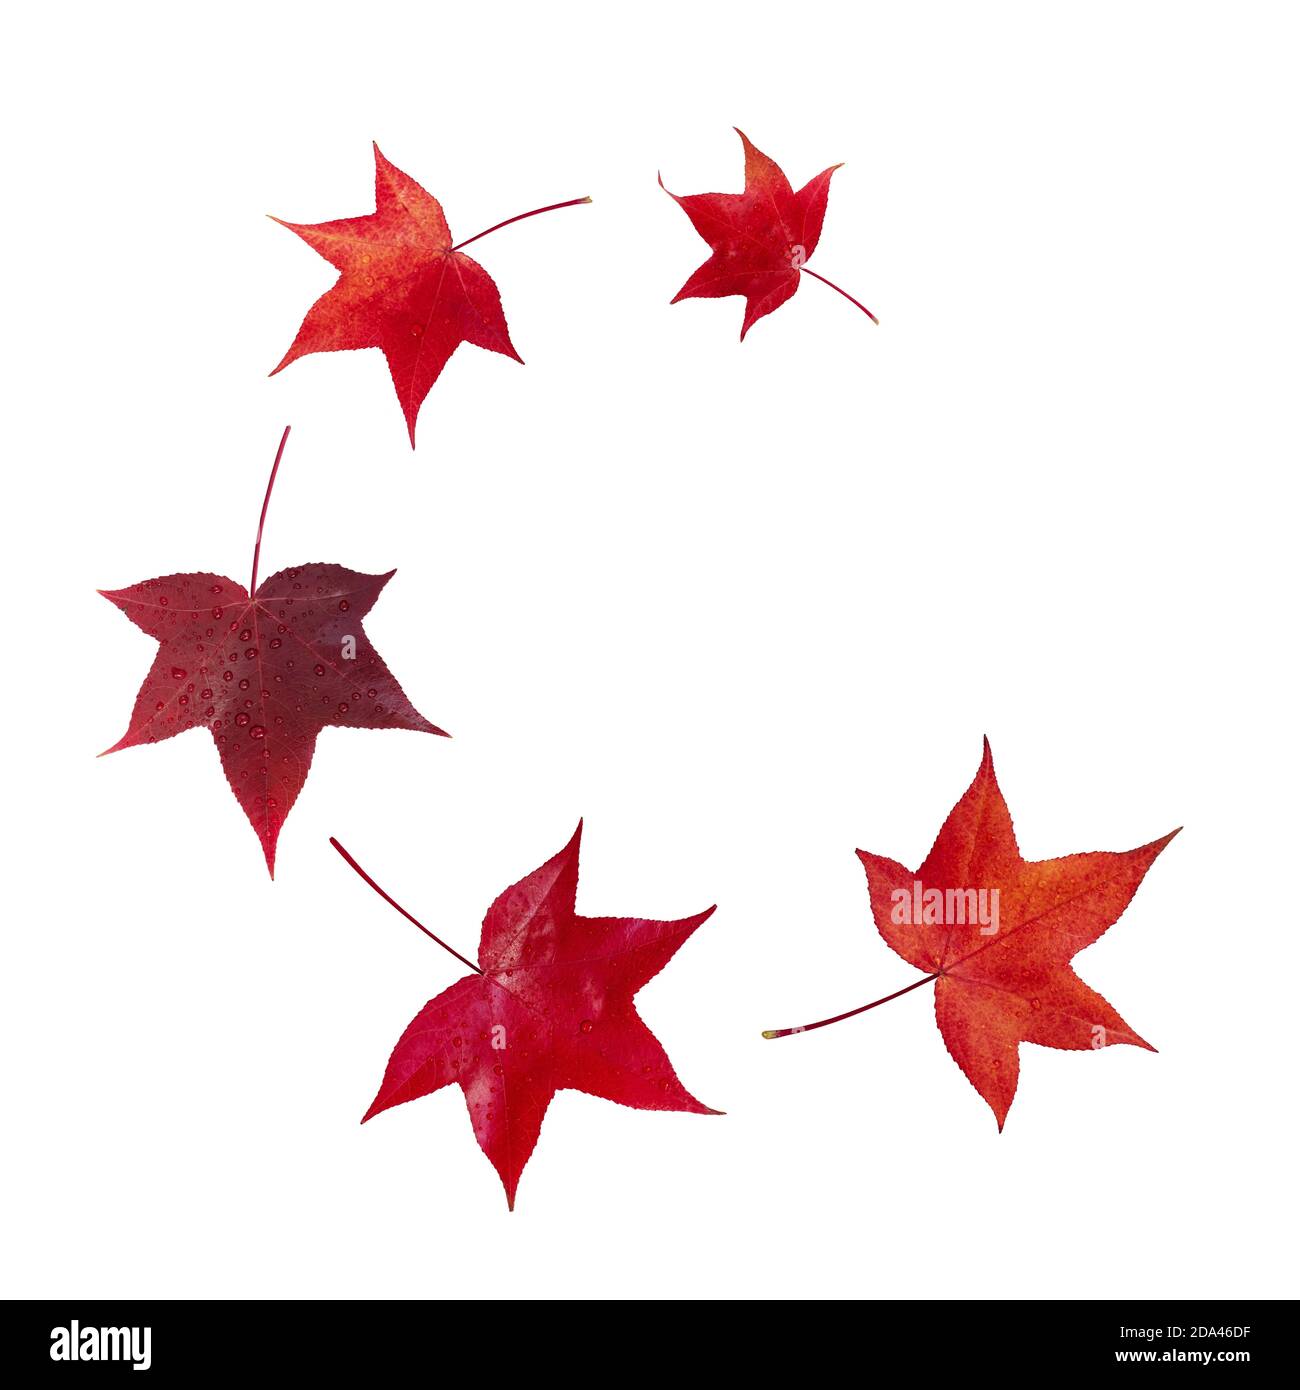 Flying fall red american sweetgum tree leaves spiral isolated on white. Liquidambar styraciflua autumn foliage with water drops. Stock Photo